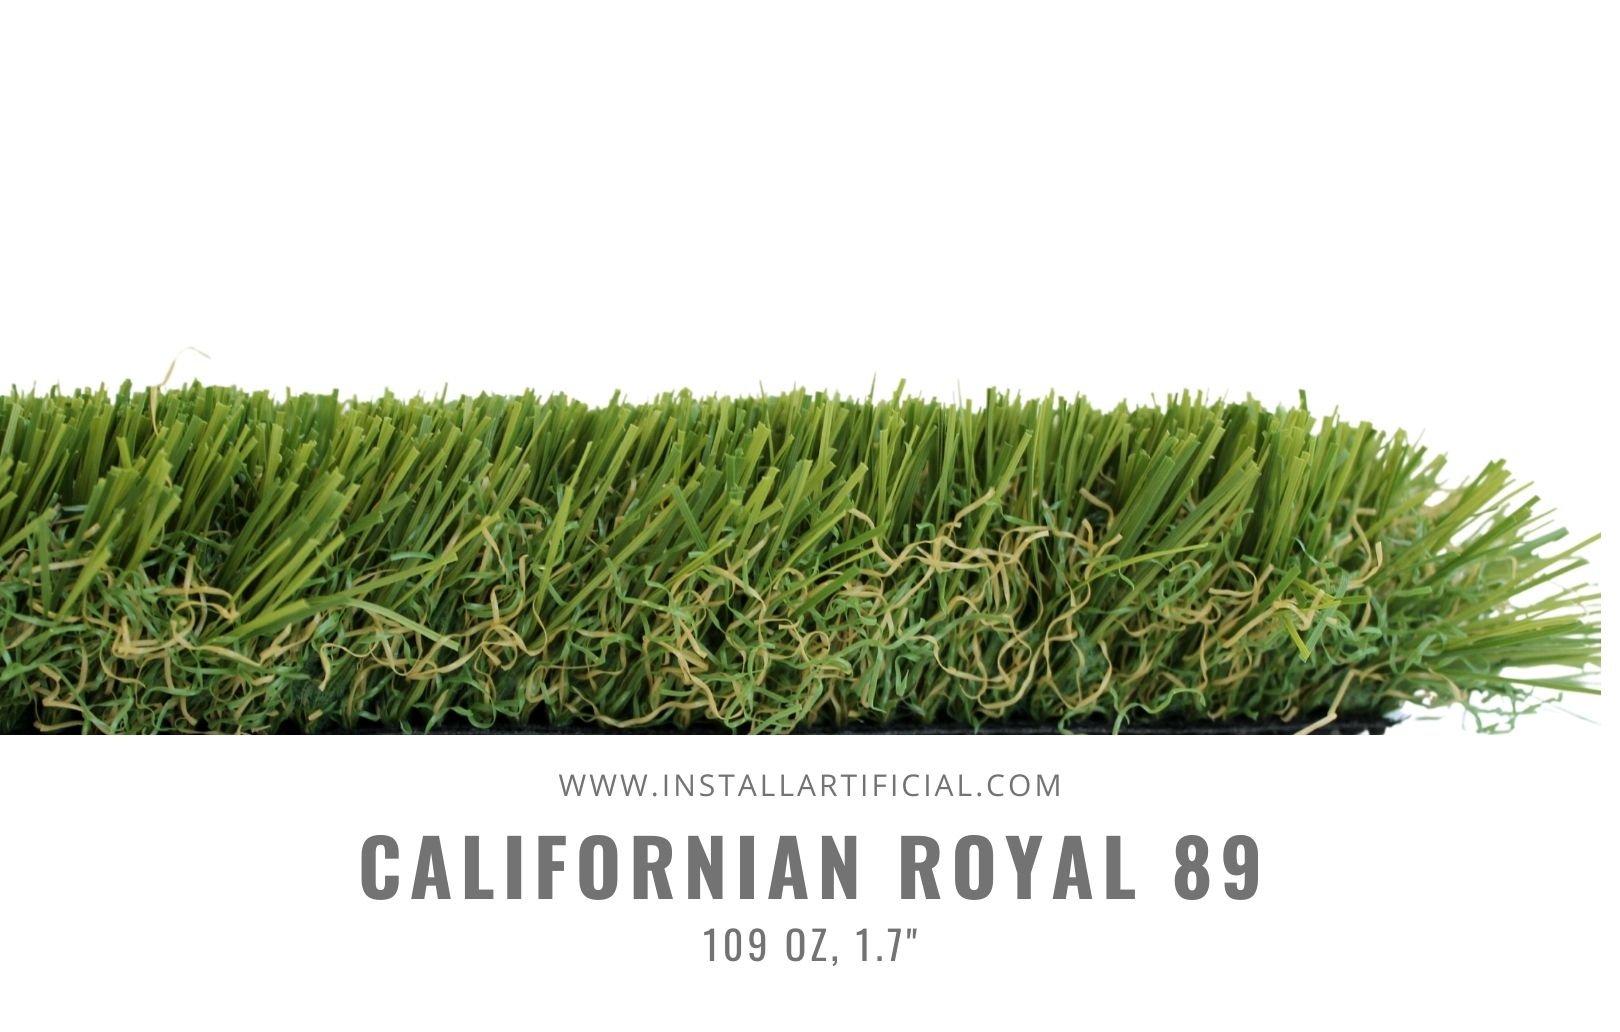 Californian Royal 89, Imperial Synthetic Turf, side view